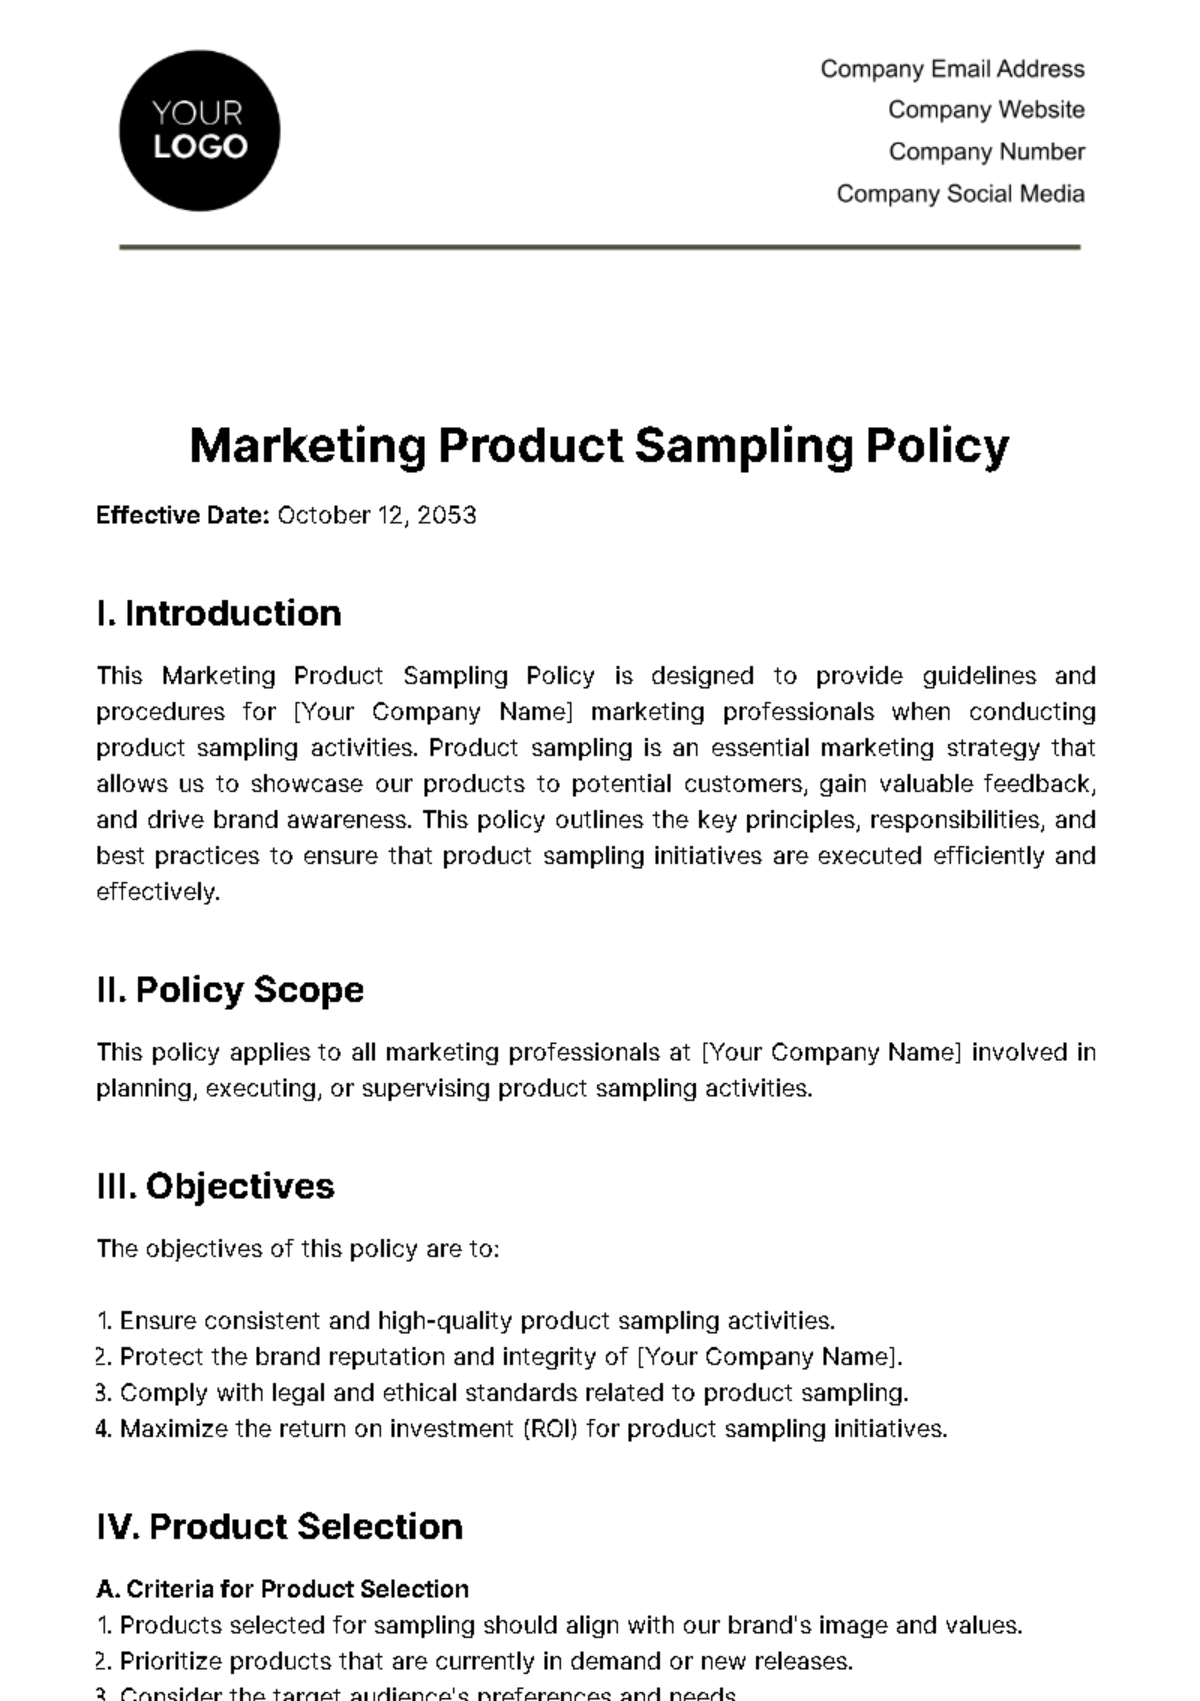 Free Marketing Product Sampling Policy Template